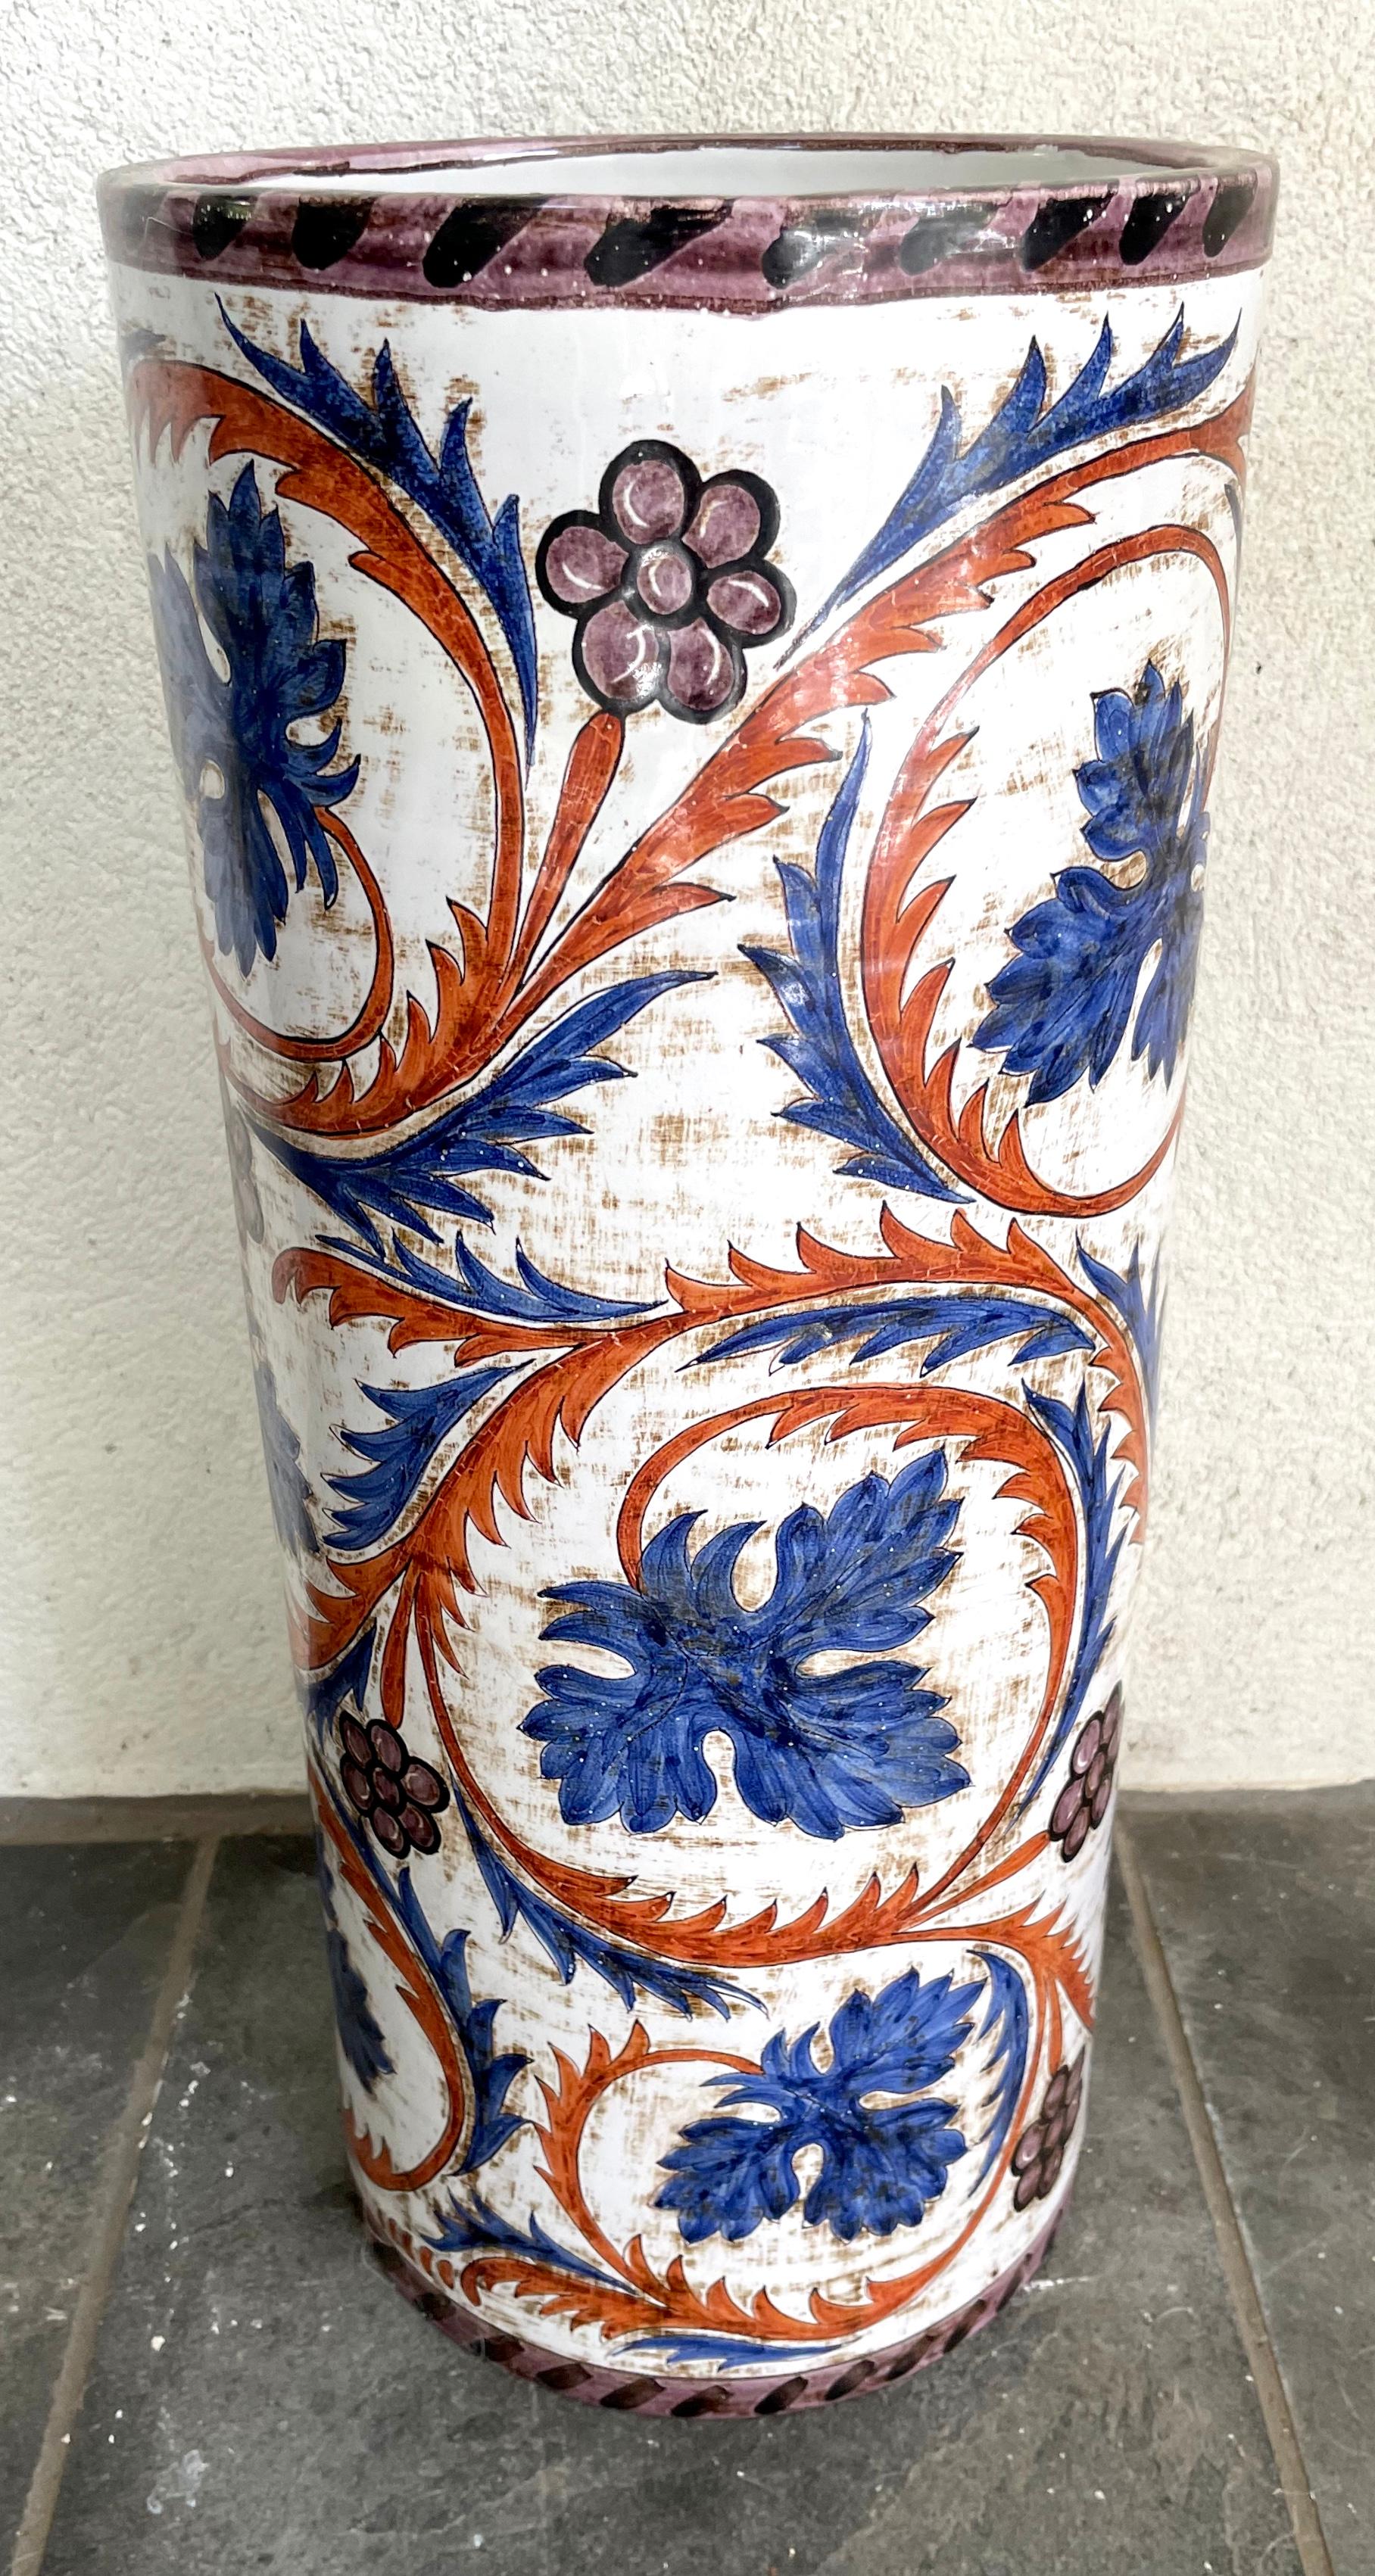 Blue and white, purple and iron red foliate umbrella stand. Antique painted Italian majolica umbrella stand with scrolling vines in blue and terracotta with eggplant flowers and rim borders all on off white background. Bottom interior long ago